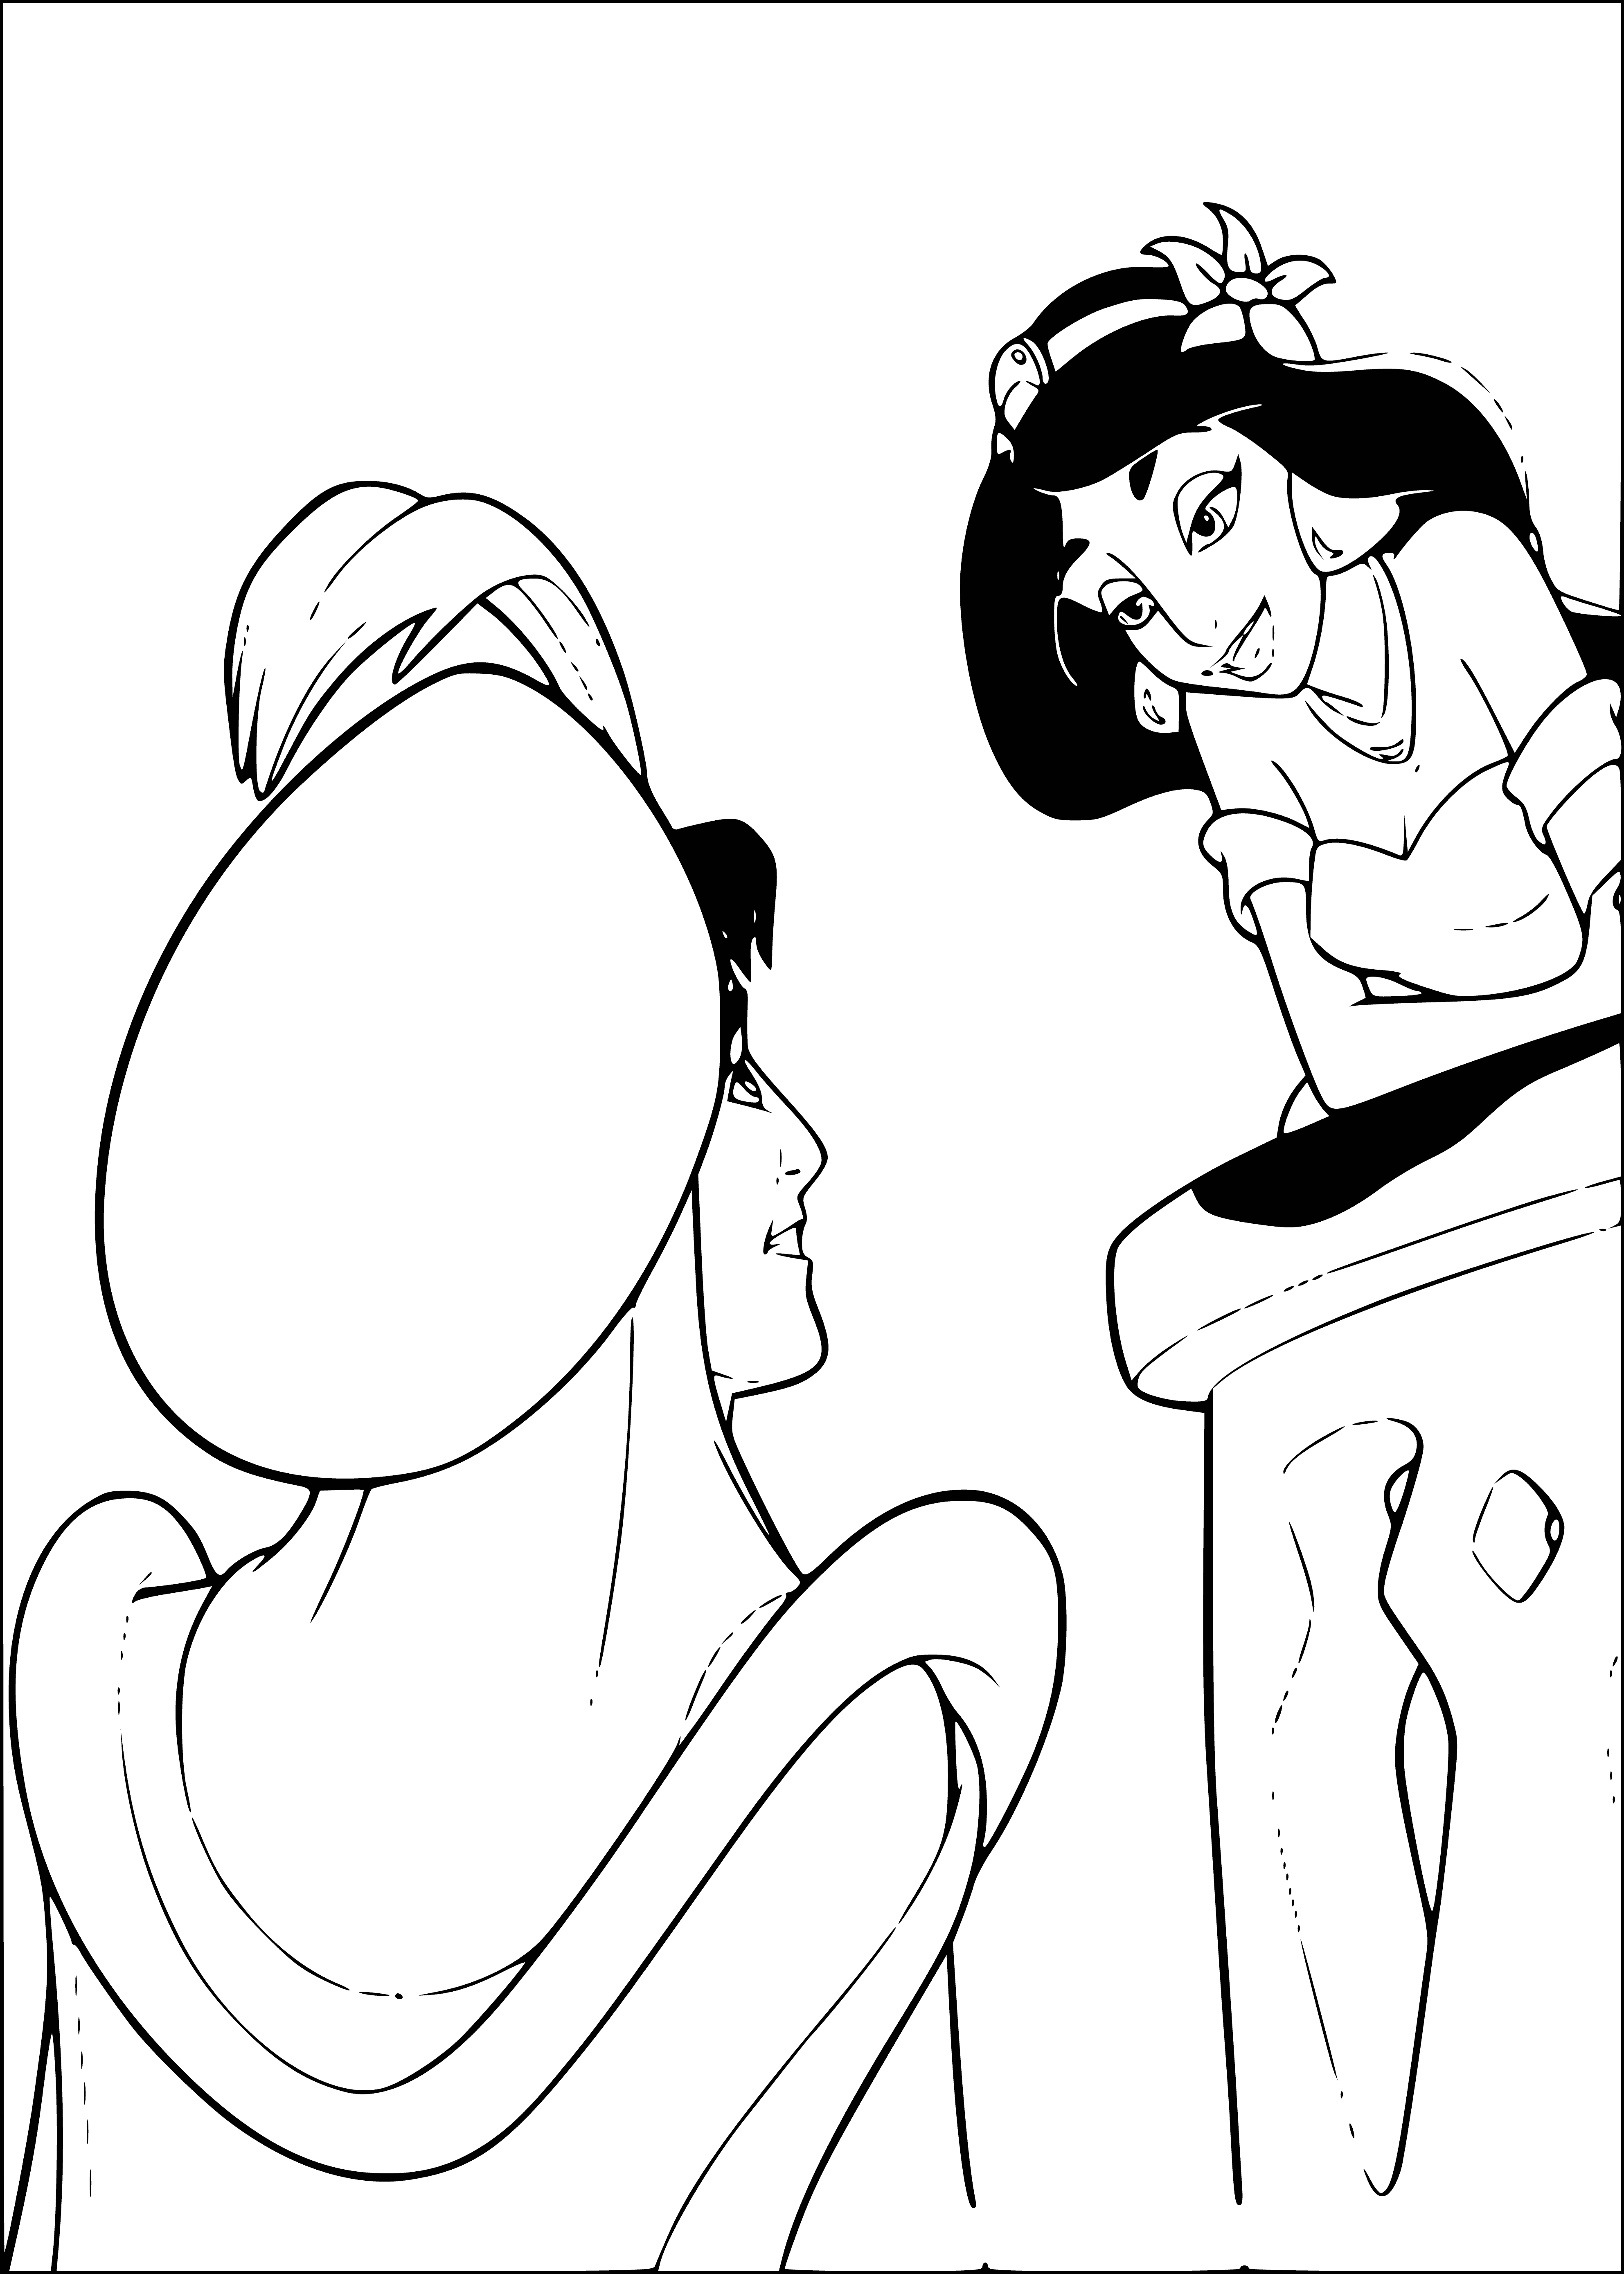 coloring page: Aladdin and Jasmine fly through a blue sky on a magic carpet, smiling and embracing each other.